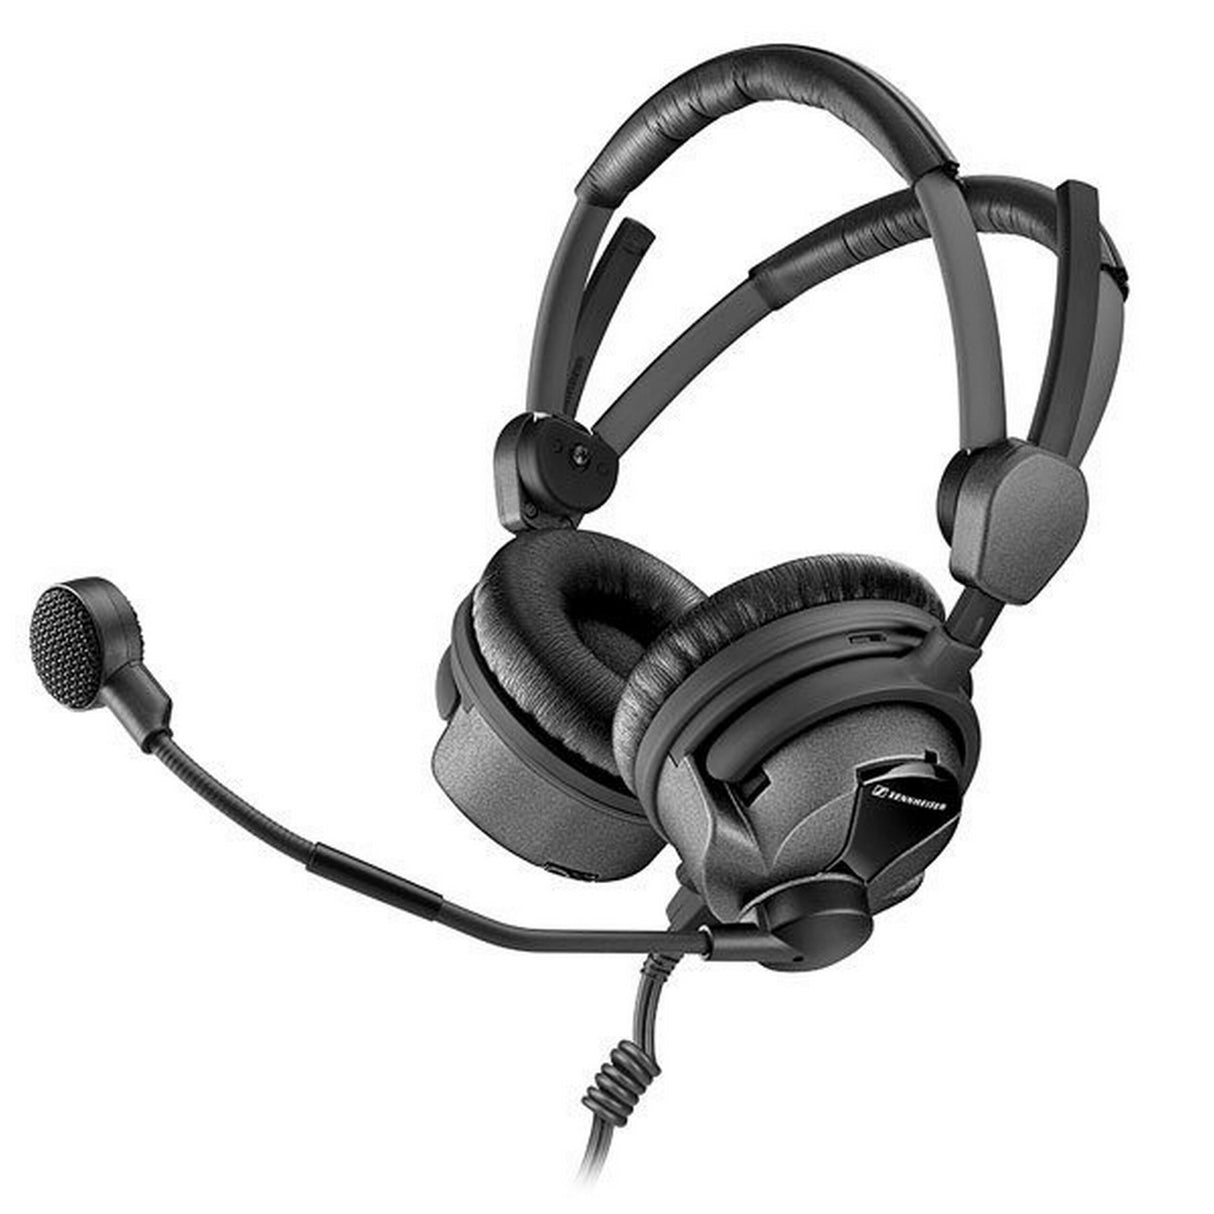 Sennheiser HMD 26-II-600-8 Broadcasting Headset with Dynamic Microphone, Unterminated Cable